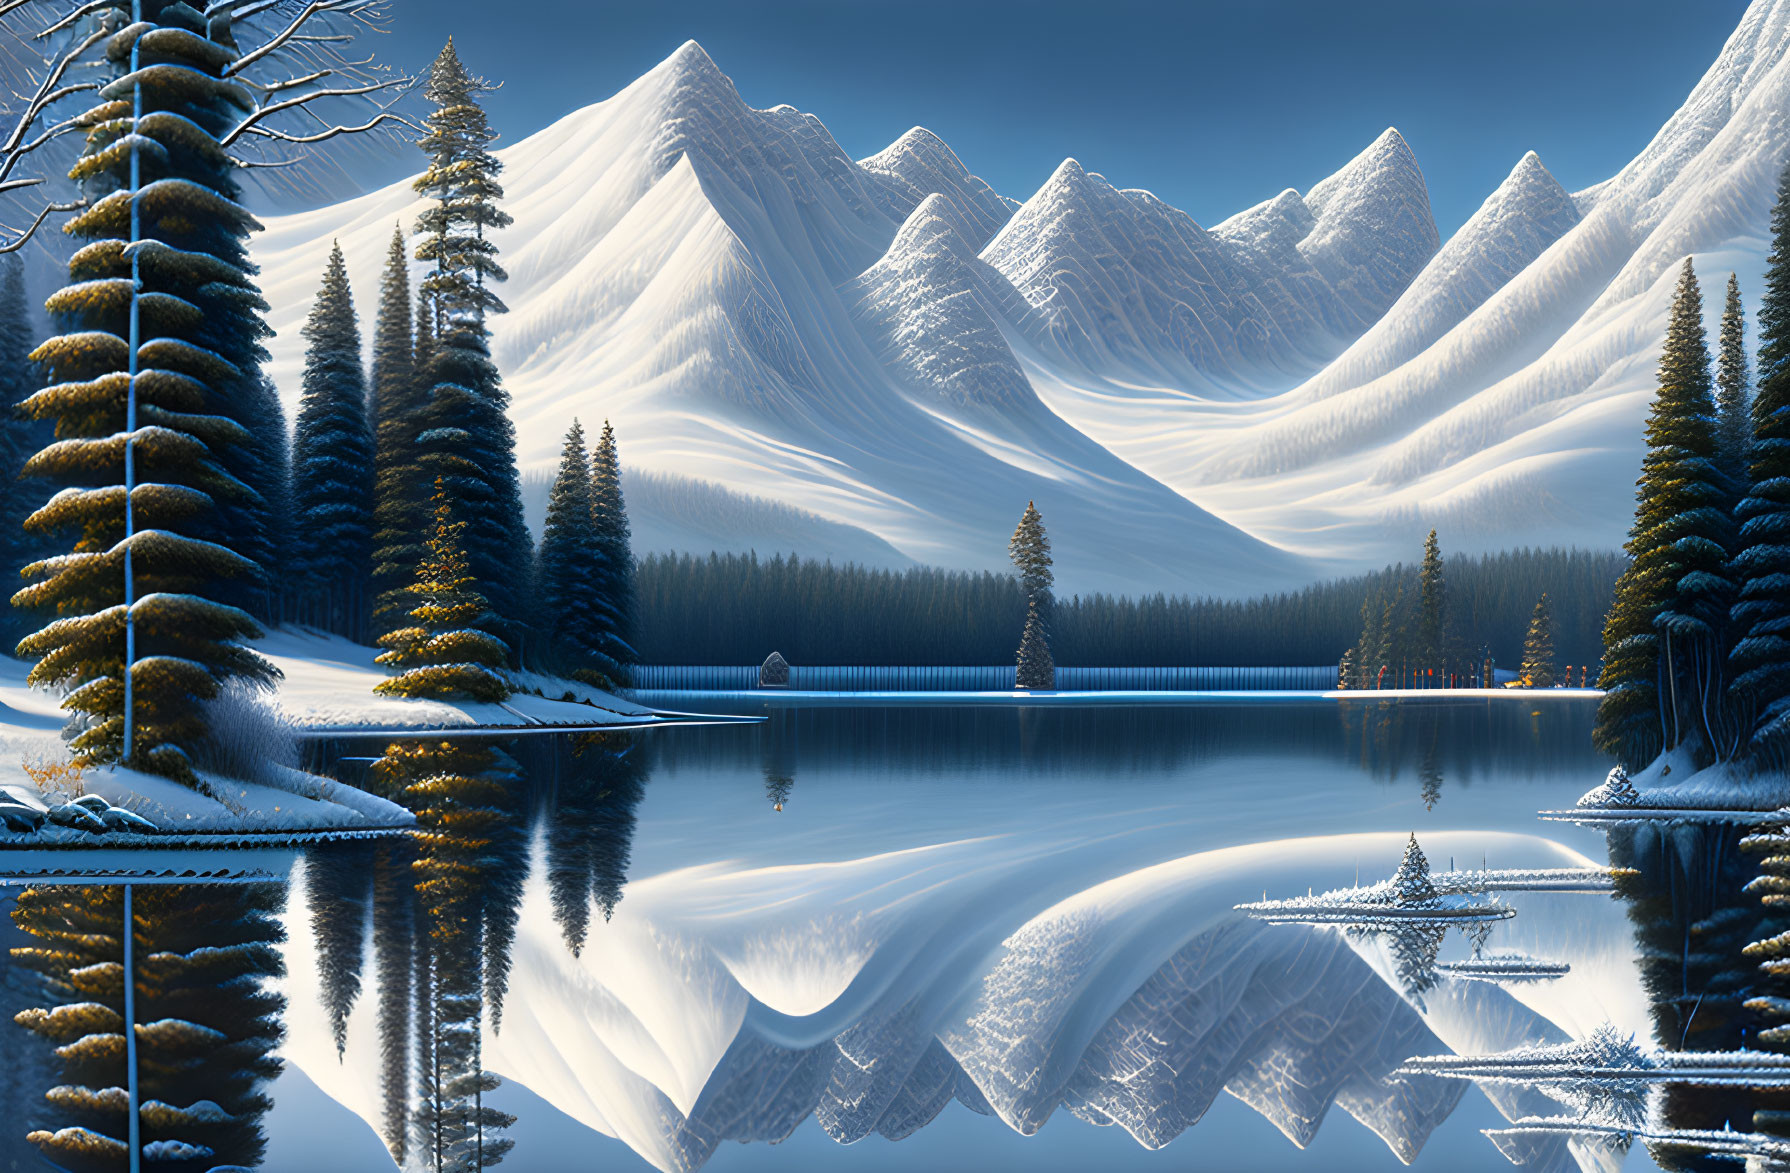 Snowy Mountains Reflected in Smooth Lake Amid Winter Landscape